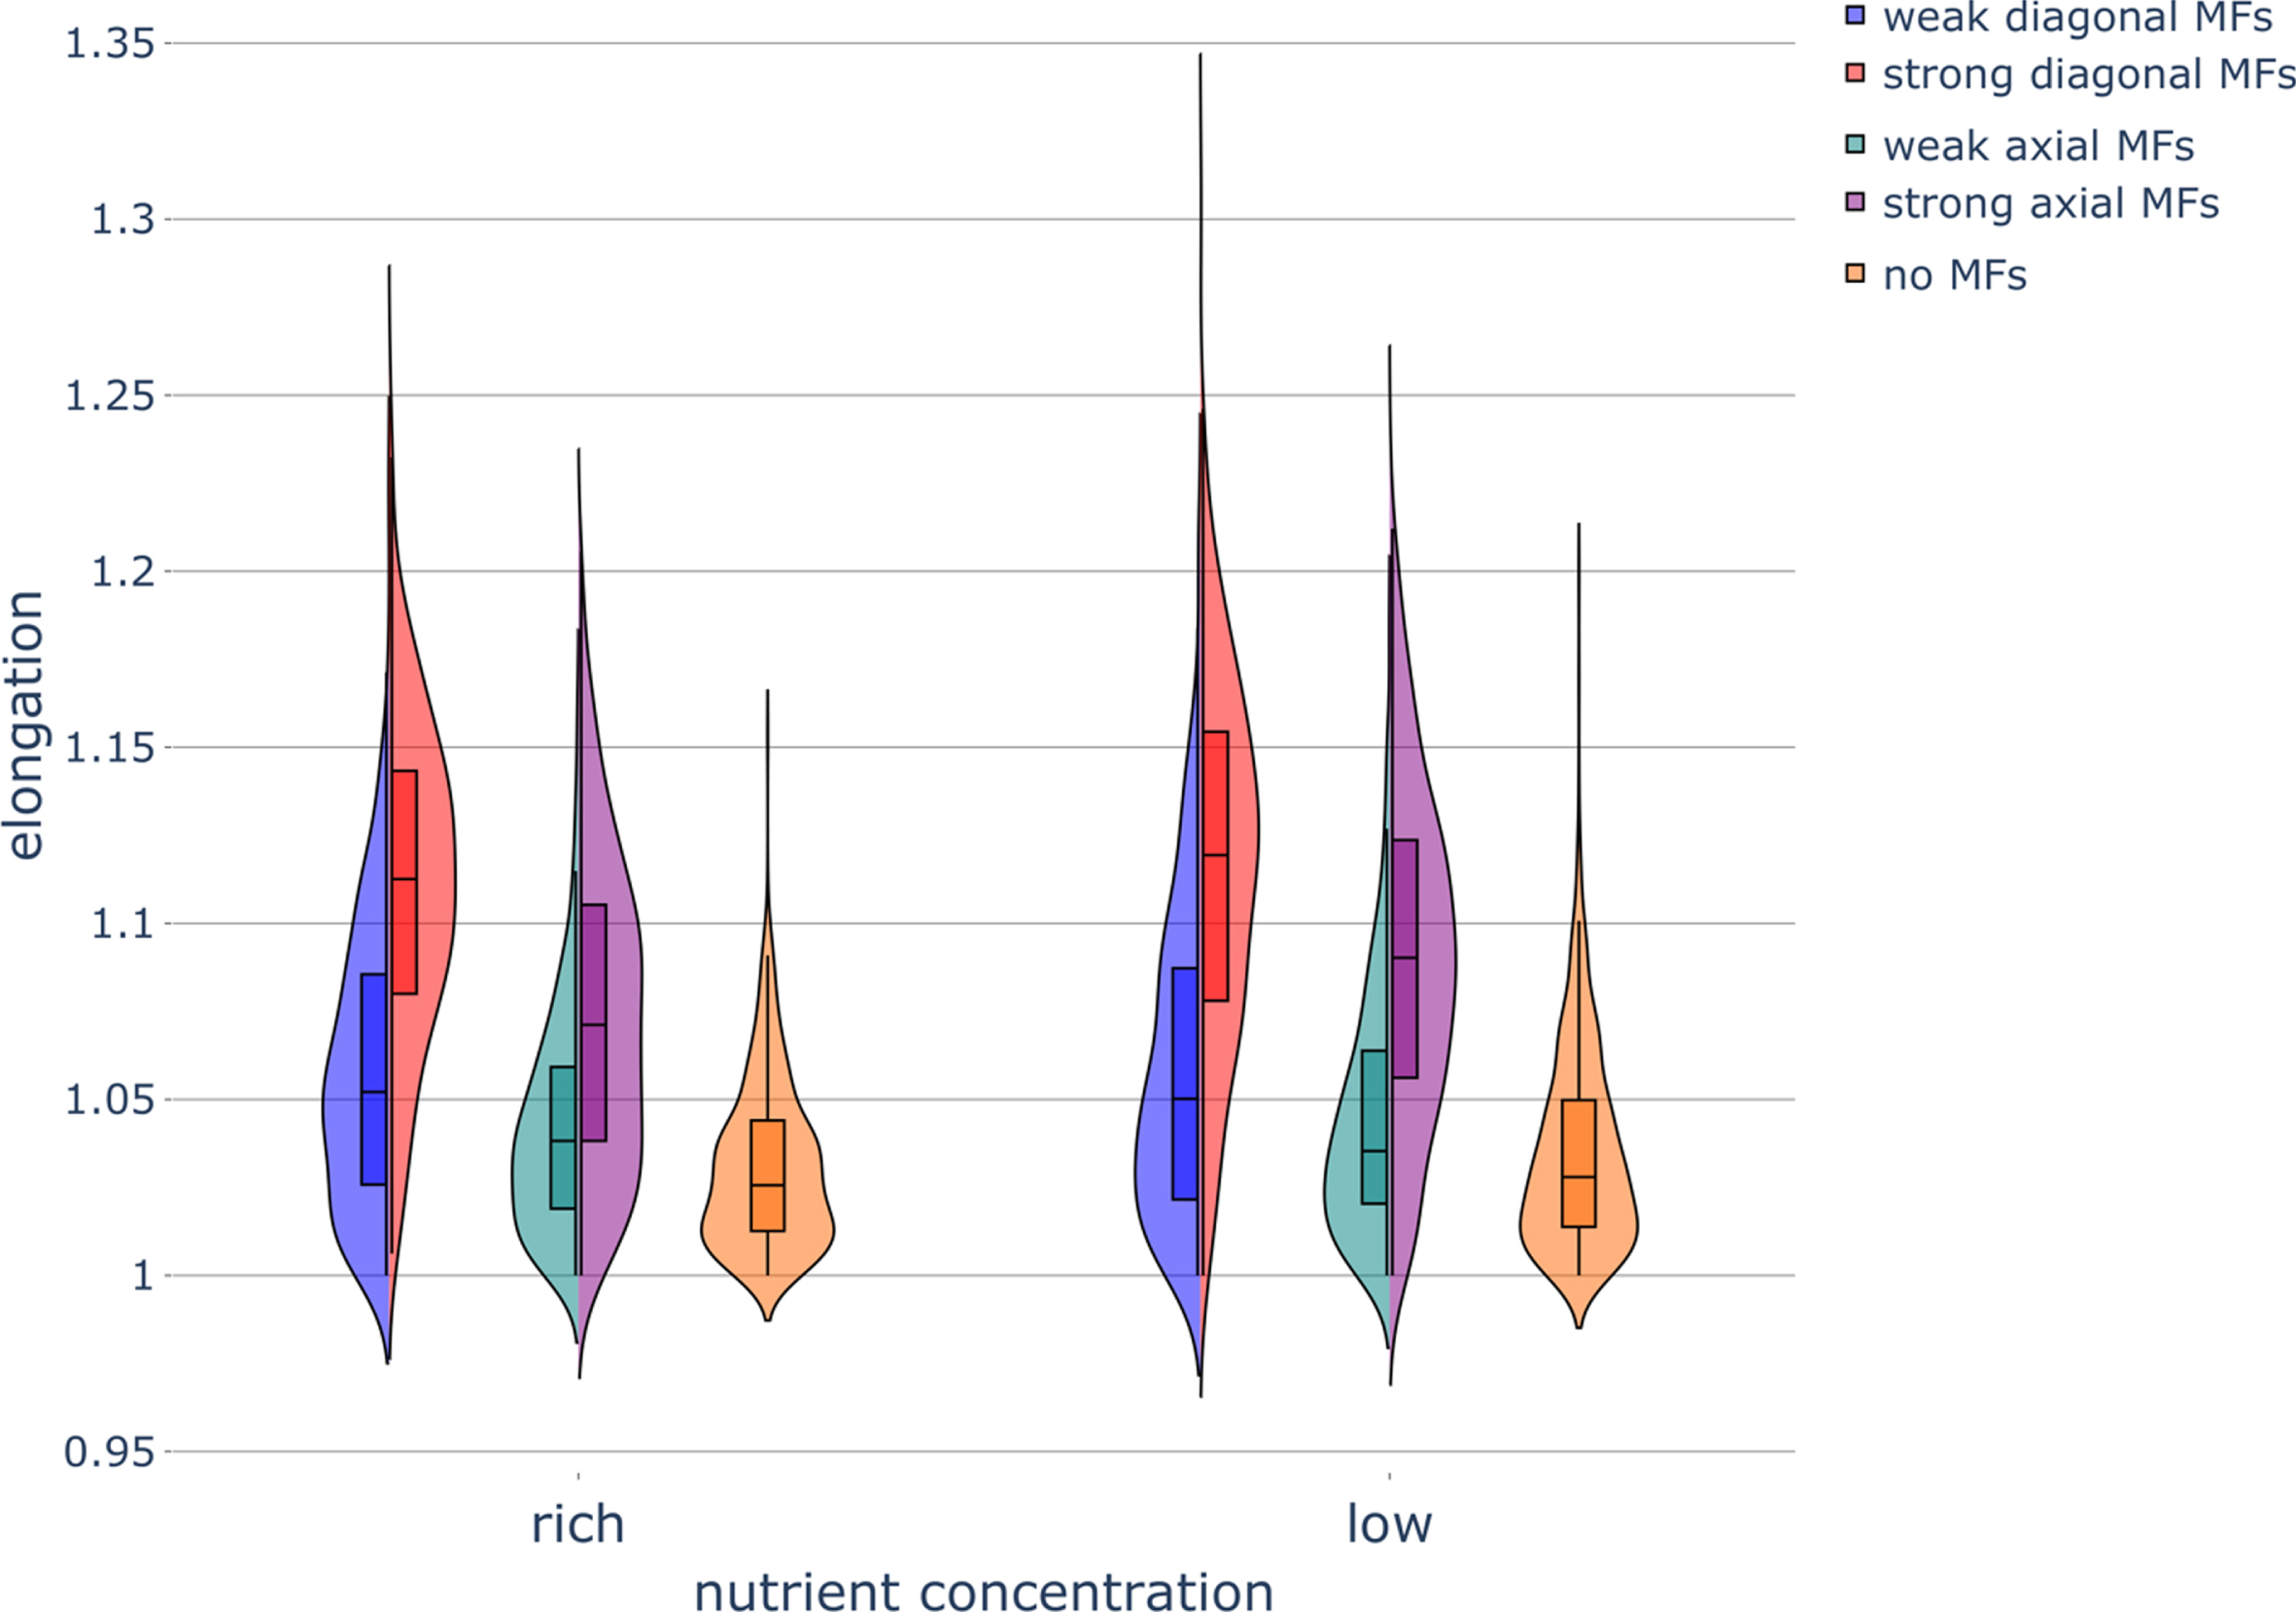 Elongation of diploid colonies without pseudohyphal growth under different nutrient conditions and applied magnetic fields. Violin plot of colony elongation under various nutrient concentrations and exposure to magnetic fields (MFs) of different strengths and directions. Parameters were set as follows: rich-nutrient condition: START_NUTRS = 20, low-nutrient condition: START_NUTRS = 2; nSteps = 10; paxial = 0; no MFs: MF_STRENGTH = 0, weak MFs: MF_STRENGTH = 0.5, strong MFs: MF_STRENGTH = 1.